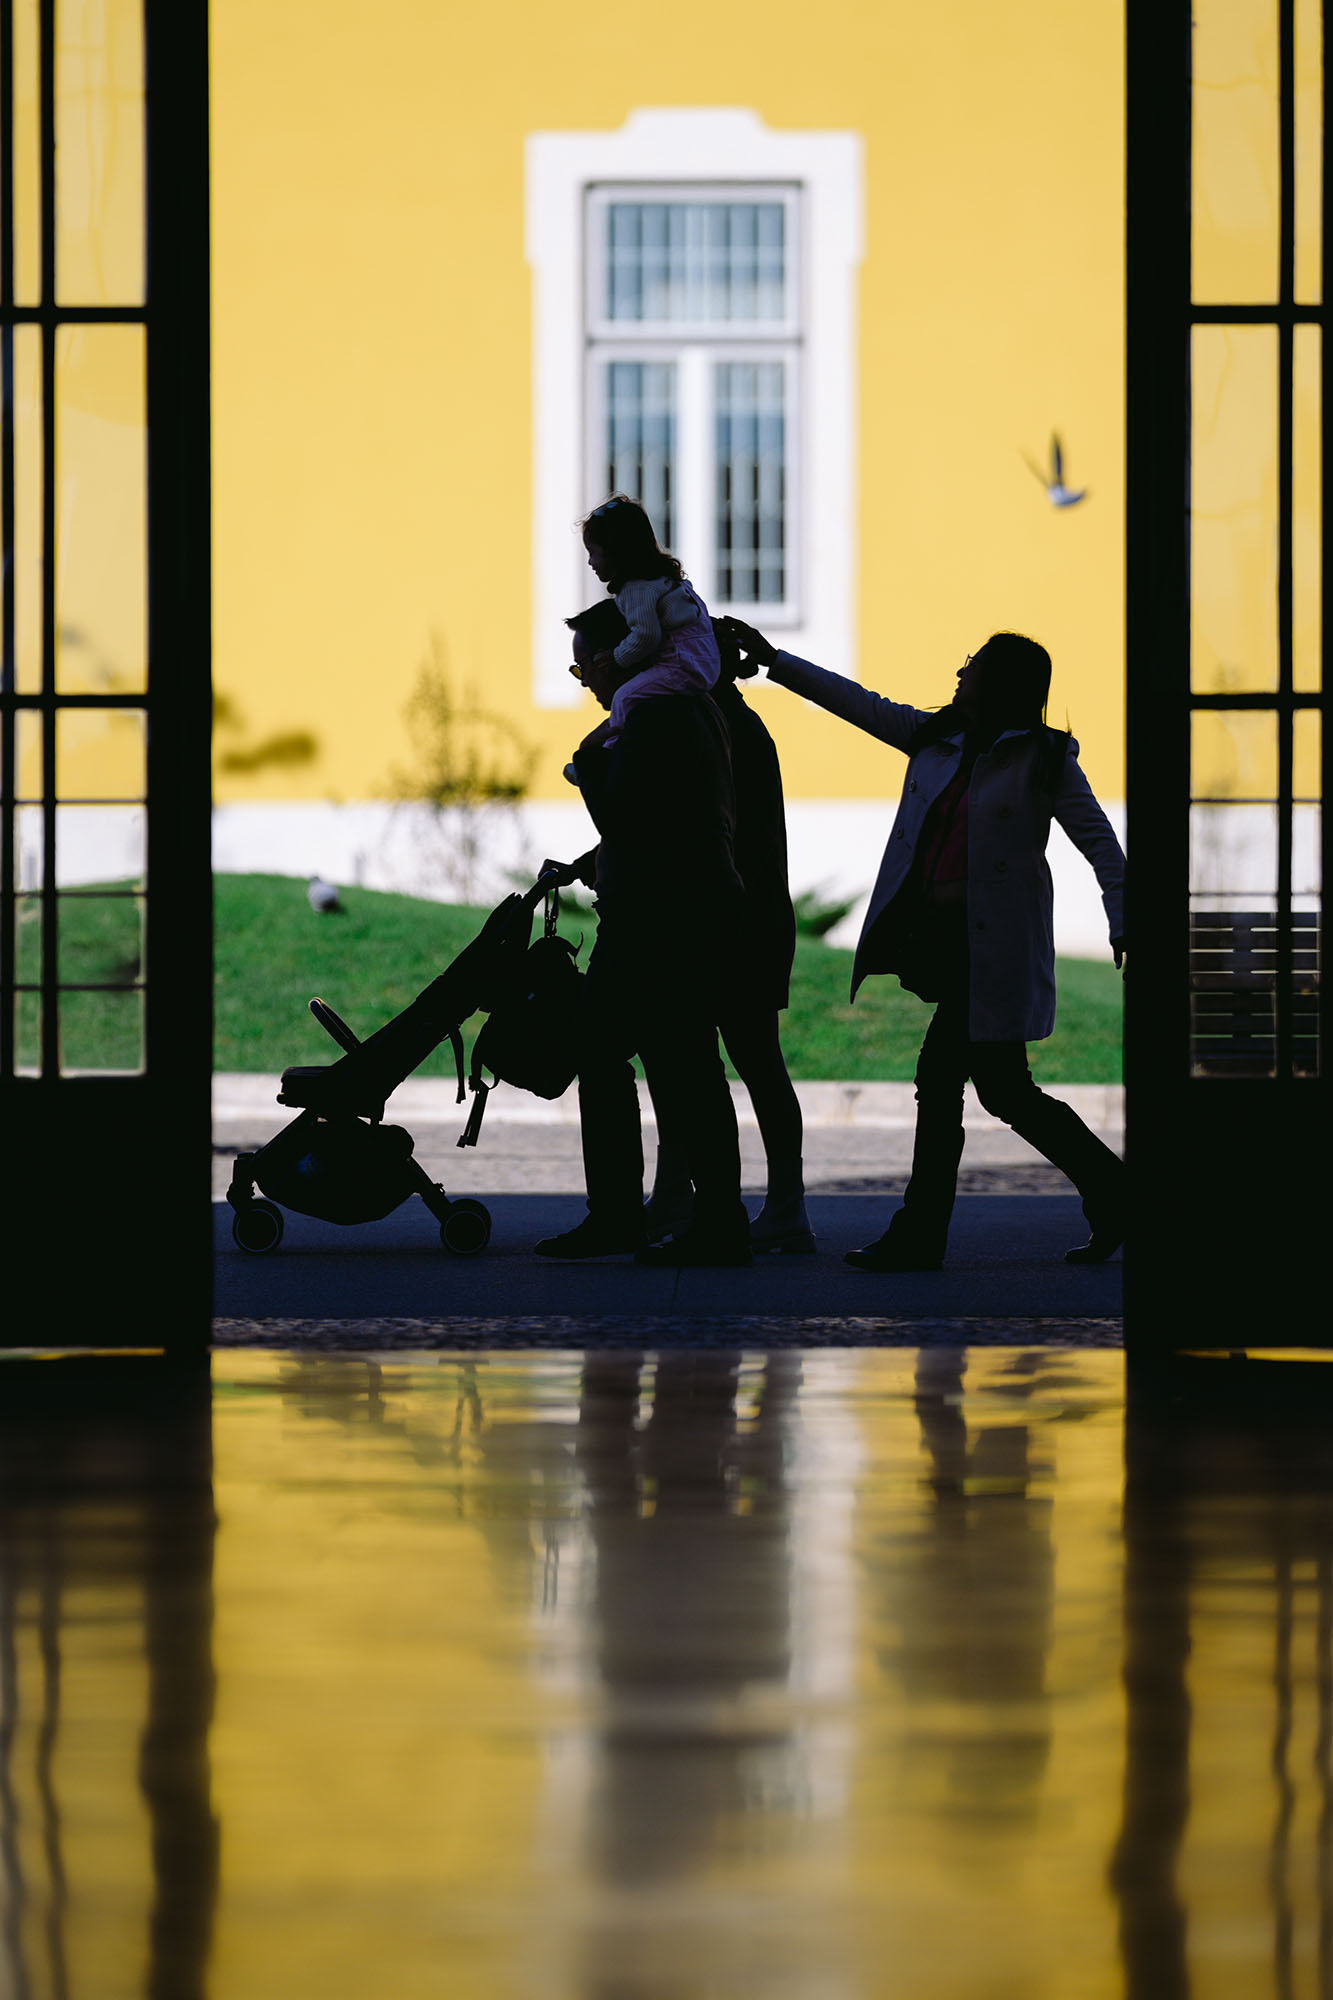 Family silhouettes at the Terreiro do Paco station in Lisbon, Portugal